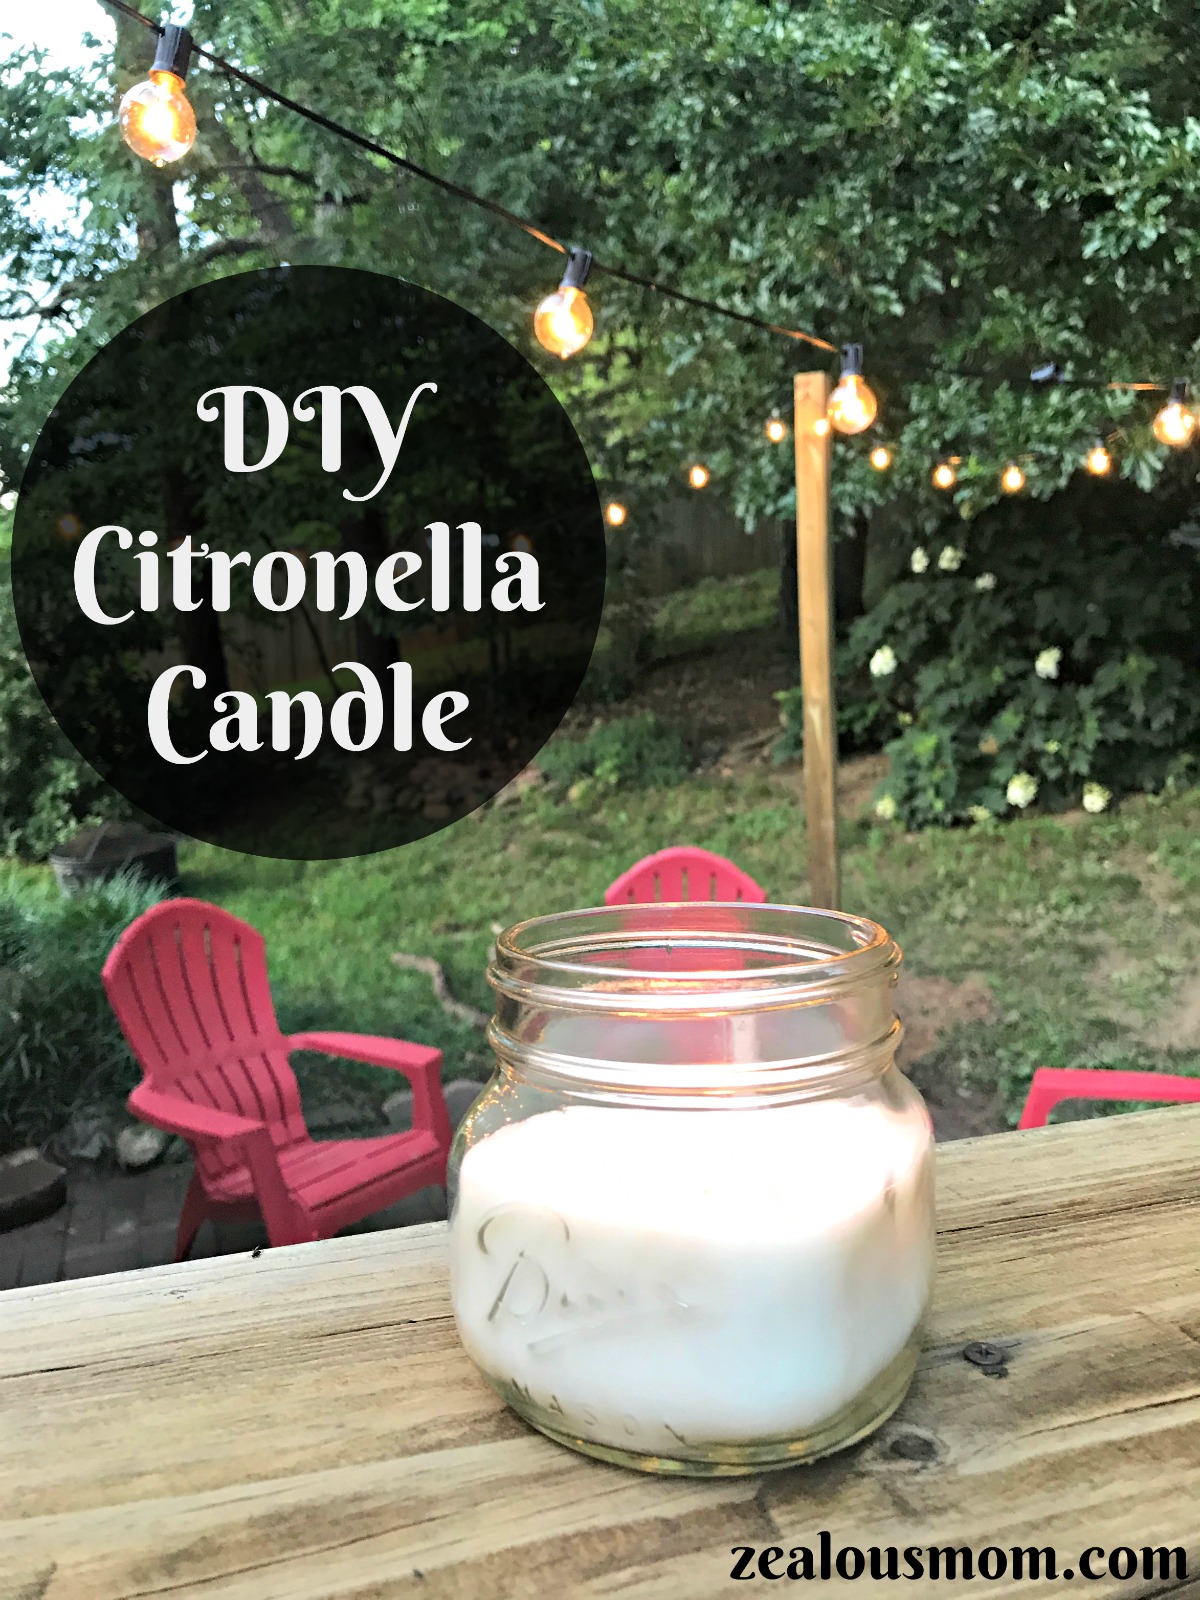 Relax this summer with a DIY Citronella candle